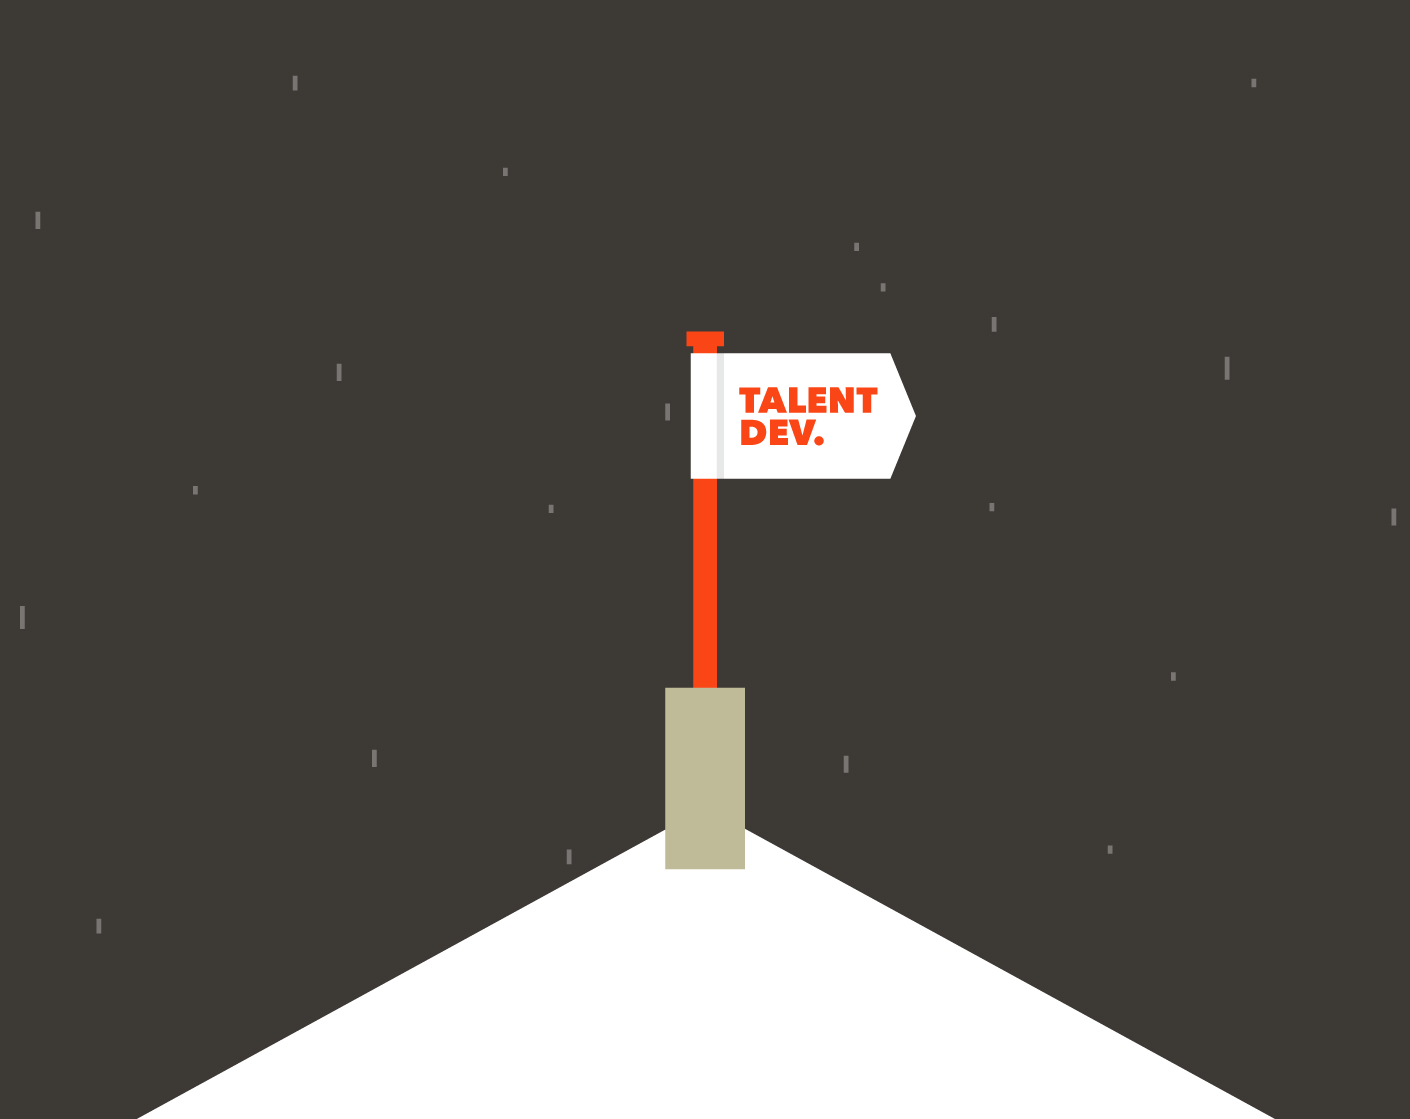 How a fluid approach to talent development can prepare us for an unpredictable future